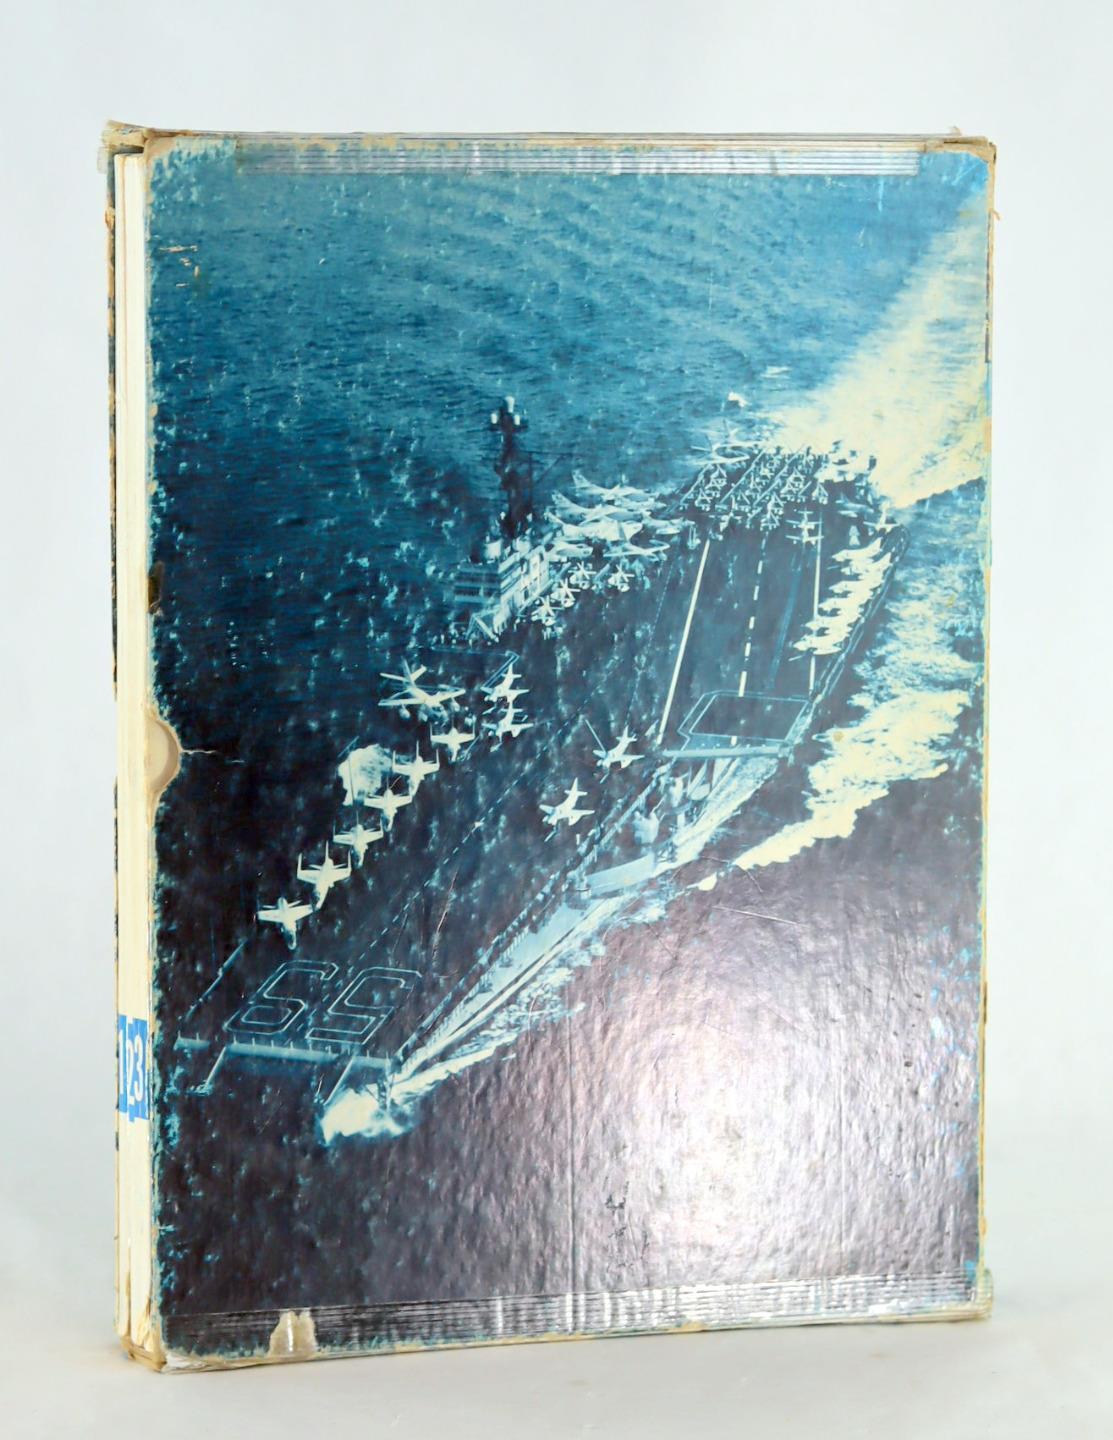 USS Forrestal CVA-59 1959-1960 The Story of a Carrier Its Concept Its Components